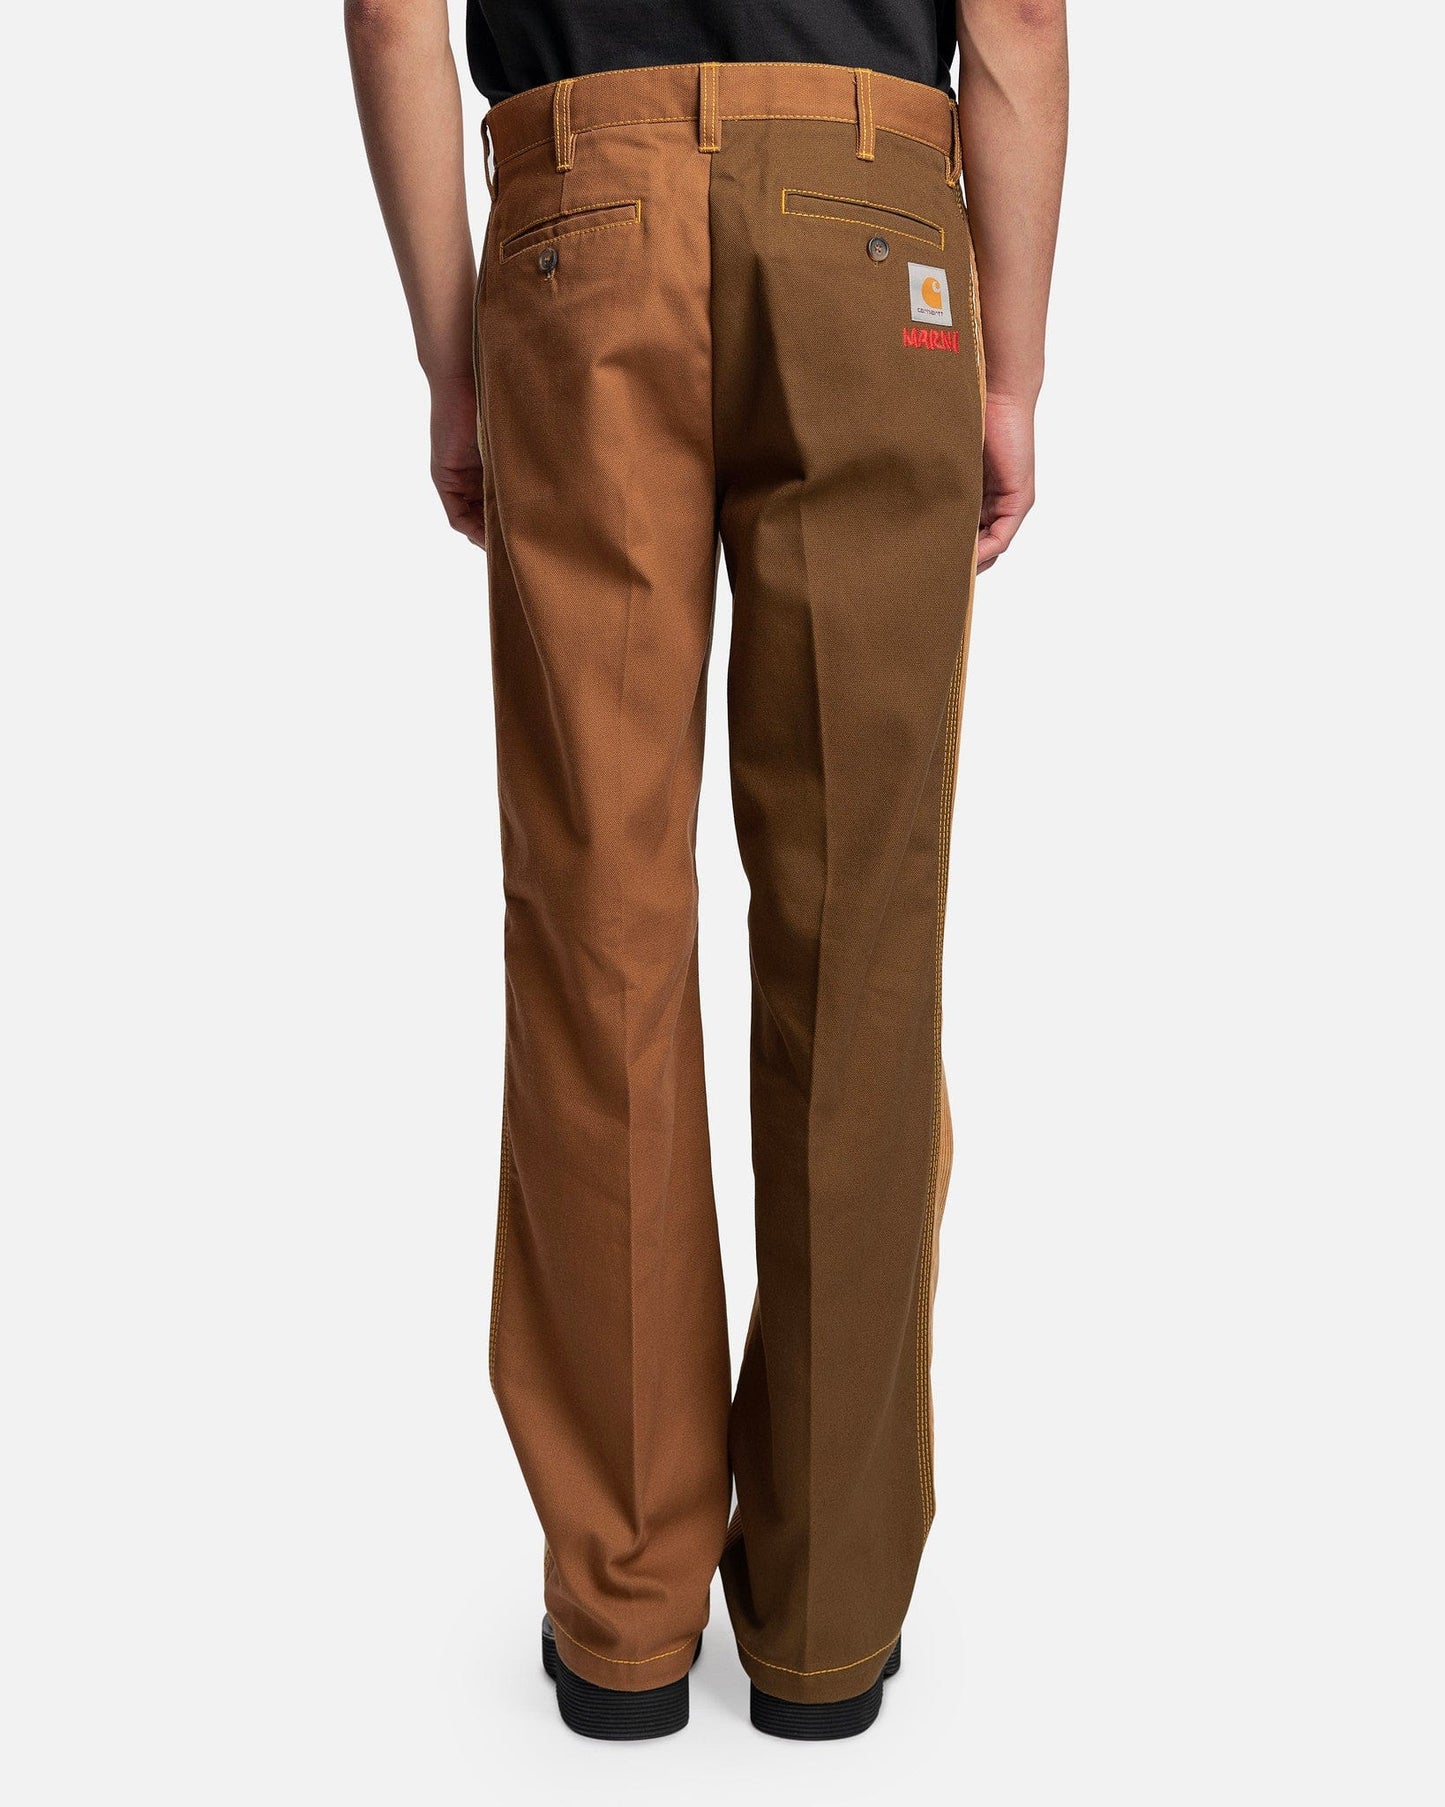 Marni Men's Pants Carhartt Cotton Canvas Trousers in Tobacco